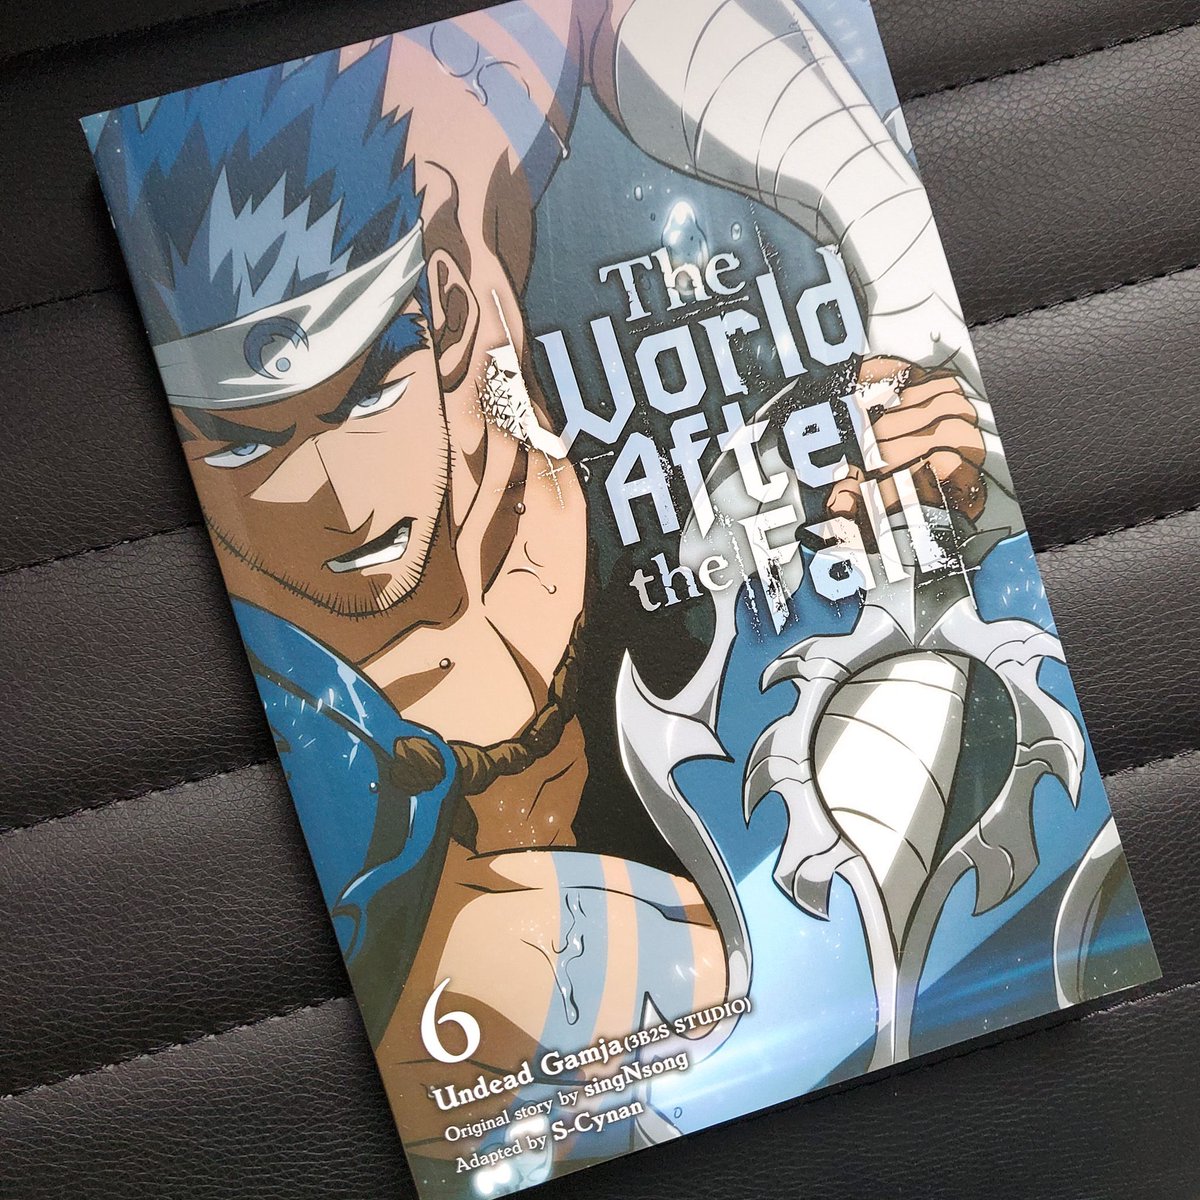 So many characters! So much world-building! All this ACTION! You're not ready for the next volume of The World After the Fall! 🤯 The World After the Fall, Vol. 6 is coming to bookstores near you May 21st, so pre-order your copy today!: buff.ly/43V8cHg